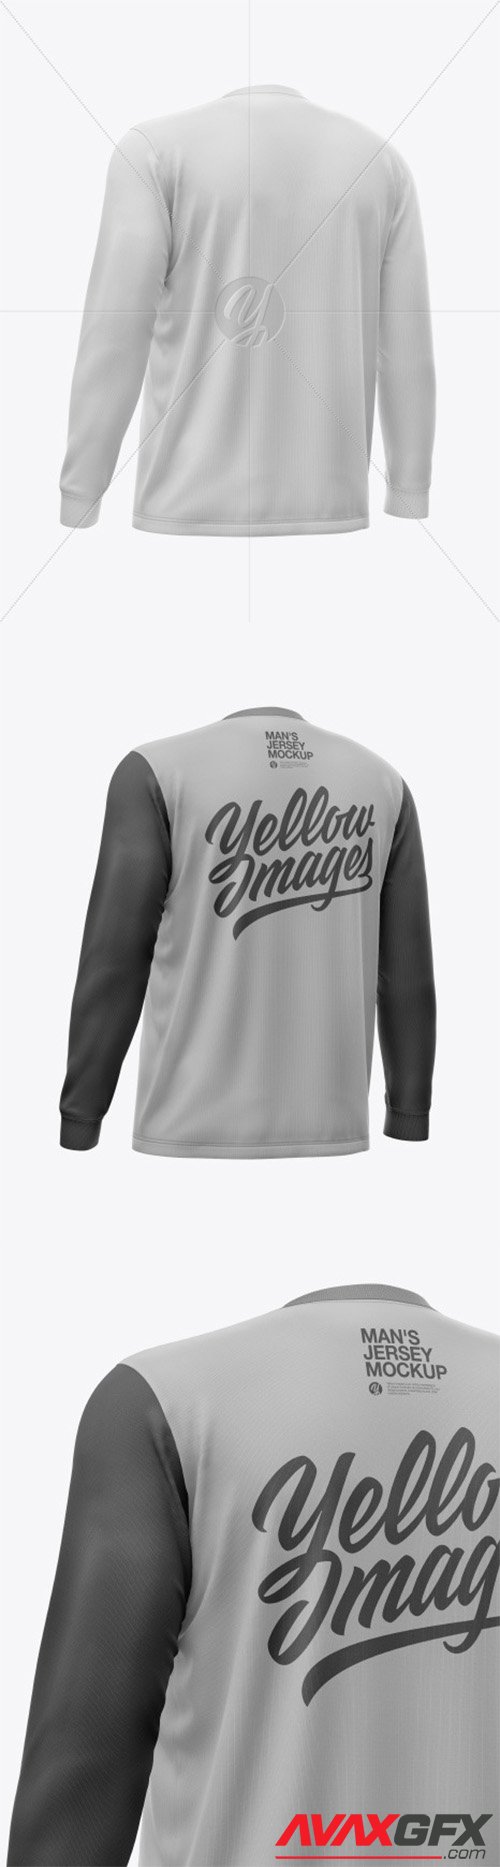 Men's Jersey With Long Sleeve Mockup 61773